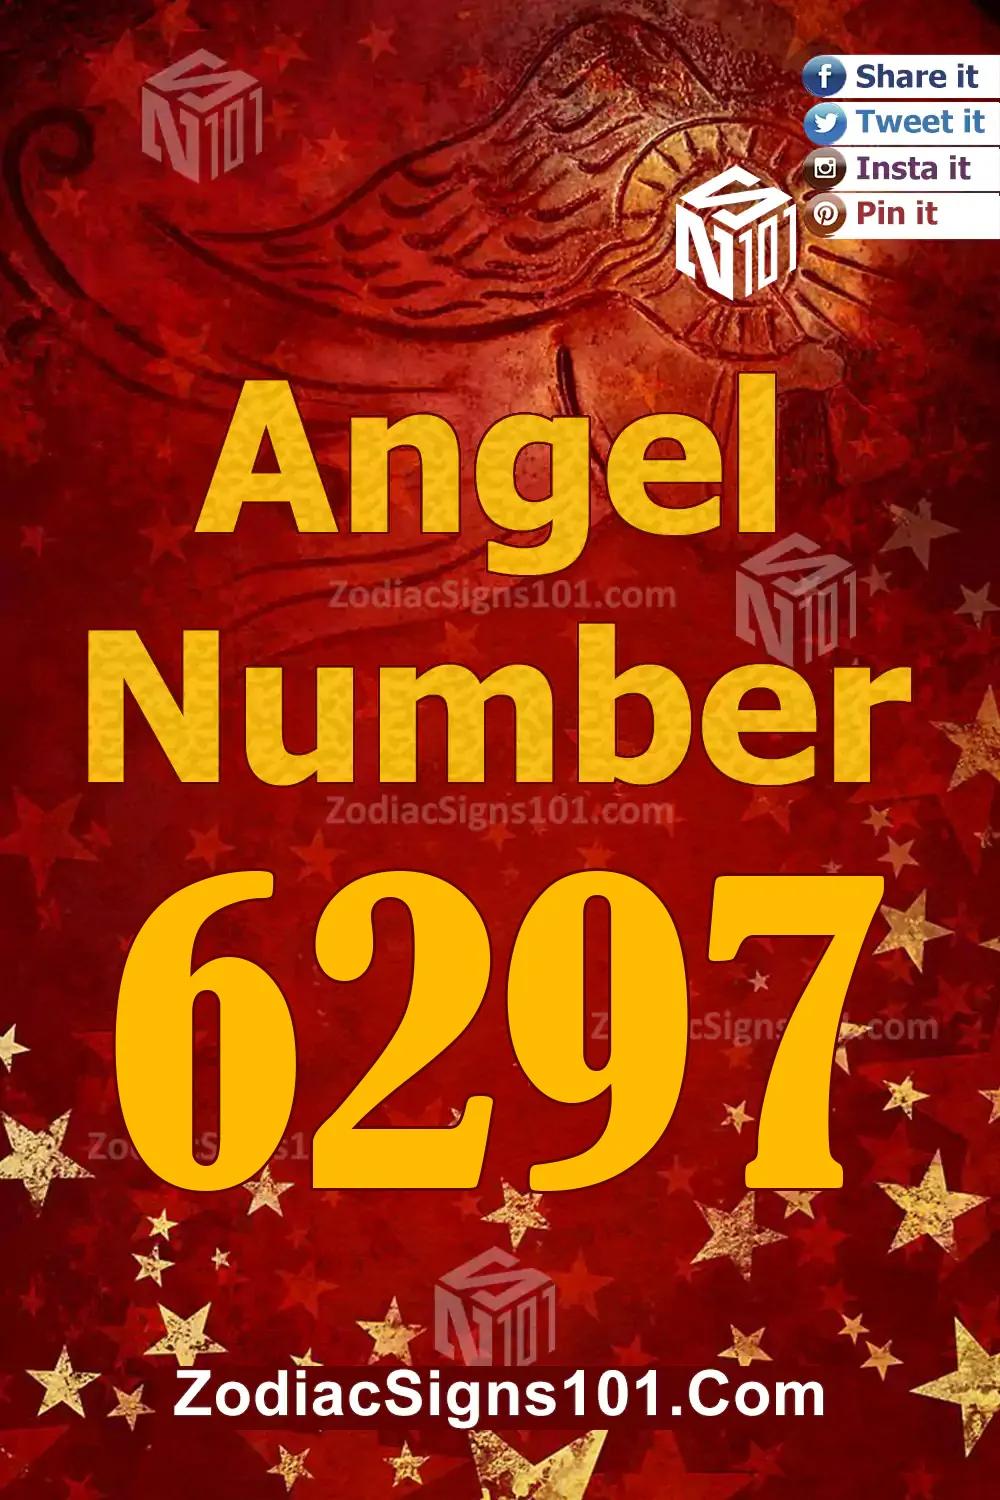 6297 Angel Number Meaning